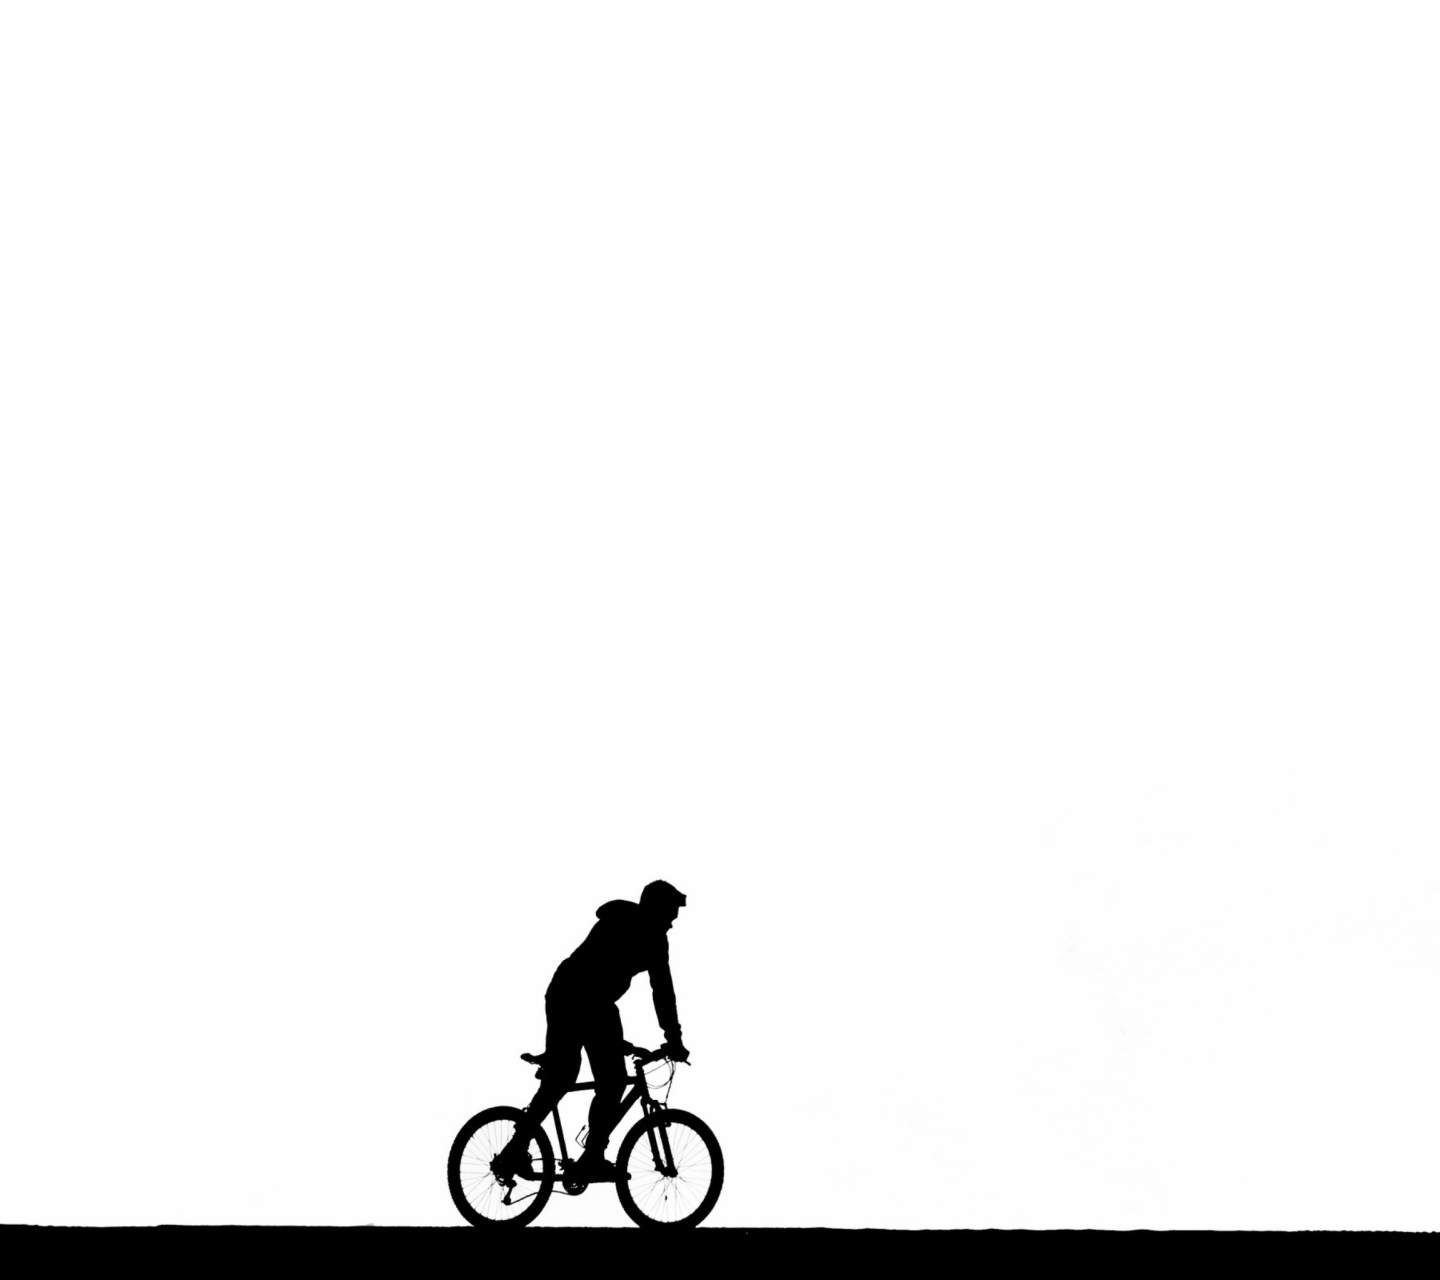 Bicycle Silhouette wallpaper 1440x1280